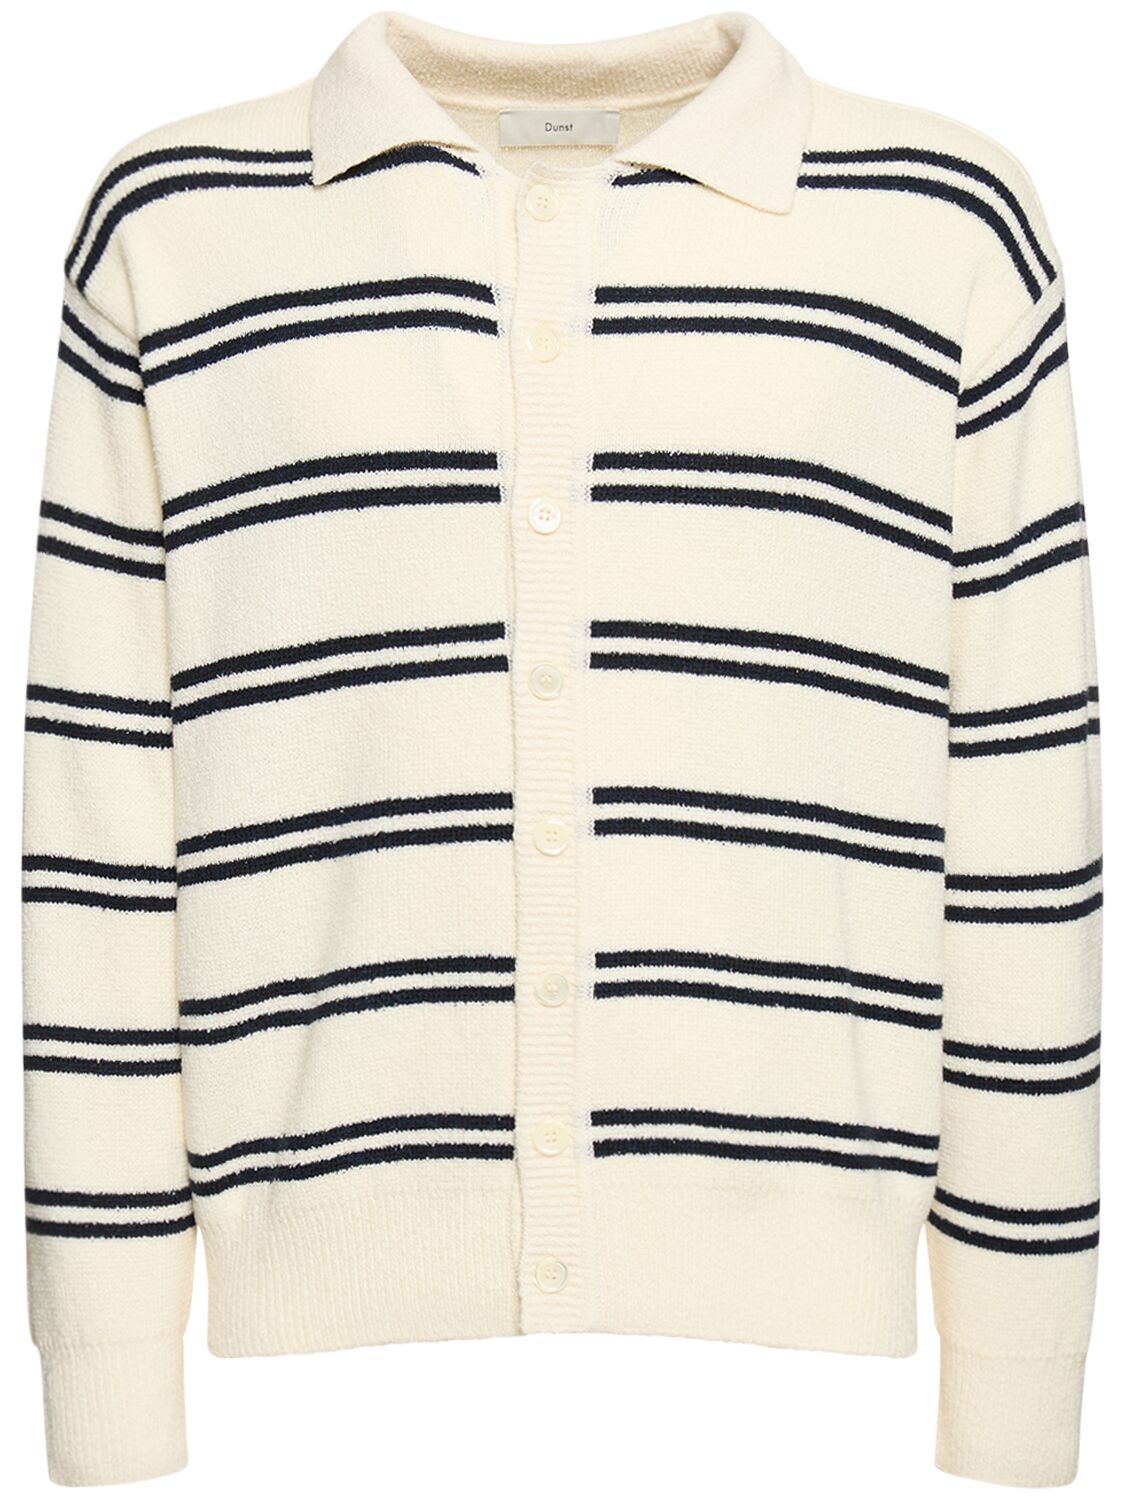 Dunst Open Collar Knitted Cardigan In Cream,navy